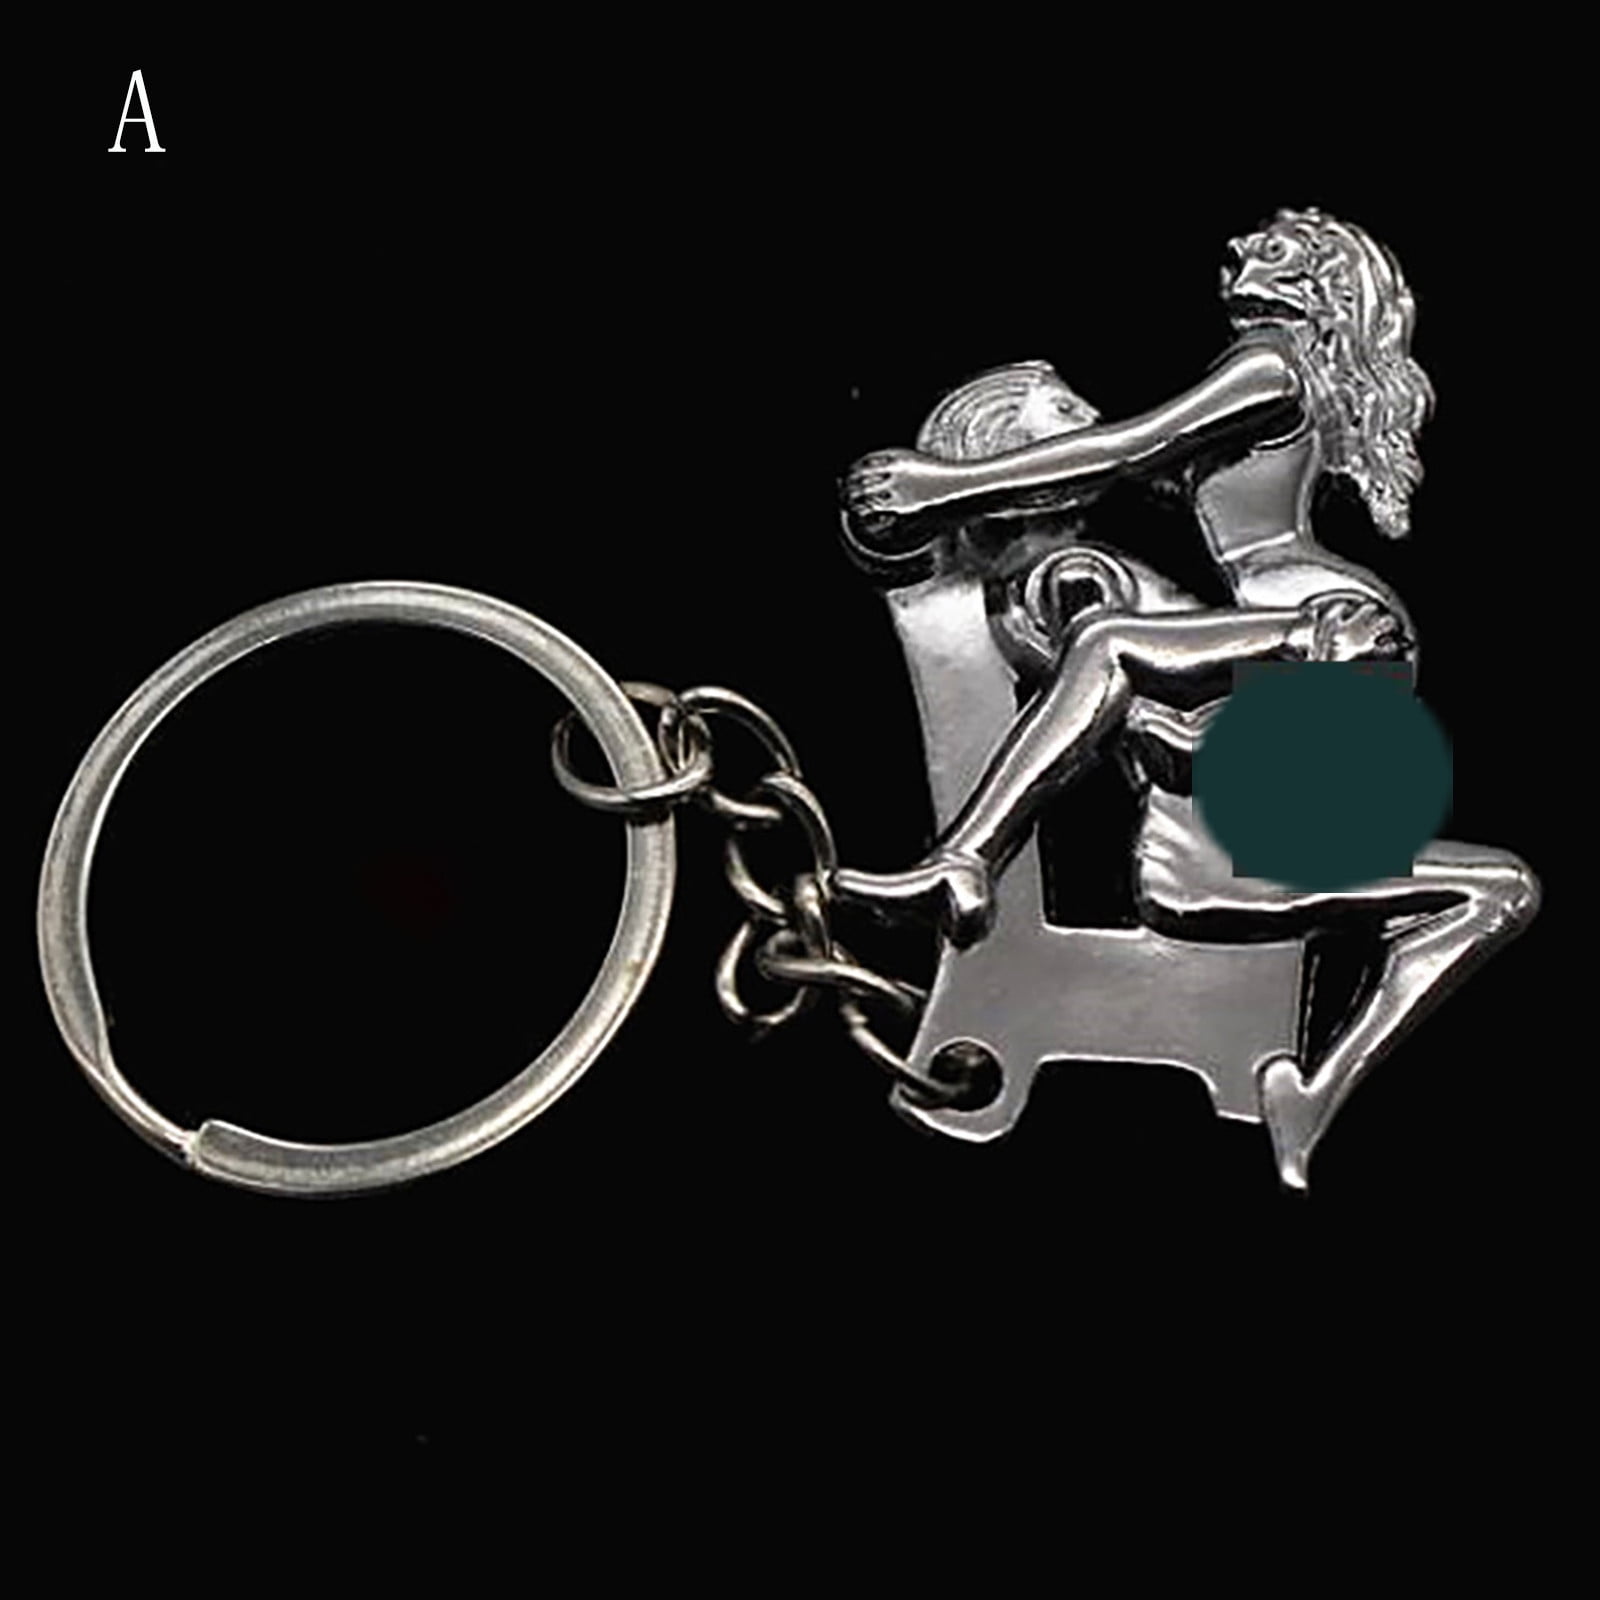 VOSS Adult Sexy Keychain Different Shape Erotic Sex Keyring For Girlfriend And Boyfriend Couple Love Game Keychain picture photo